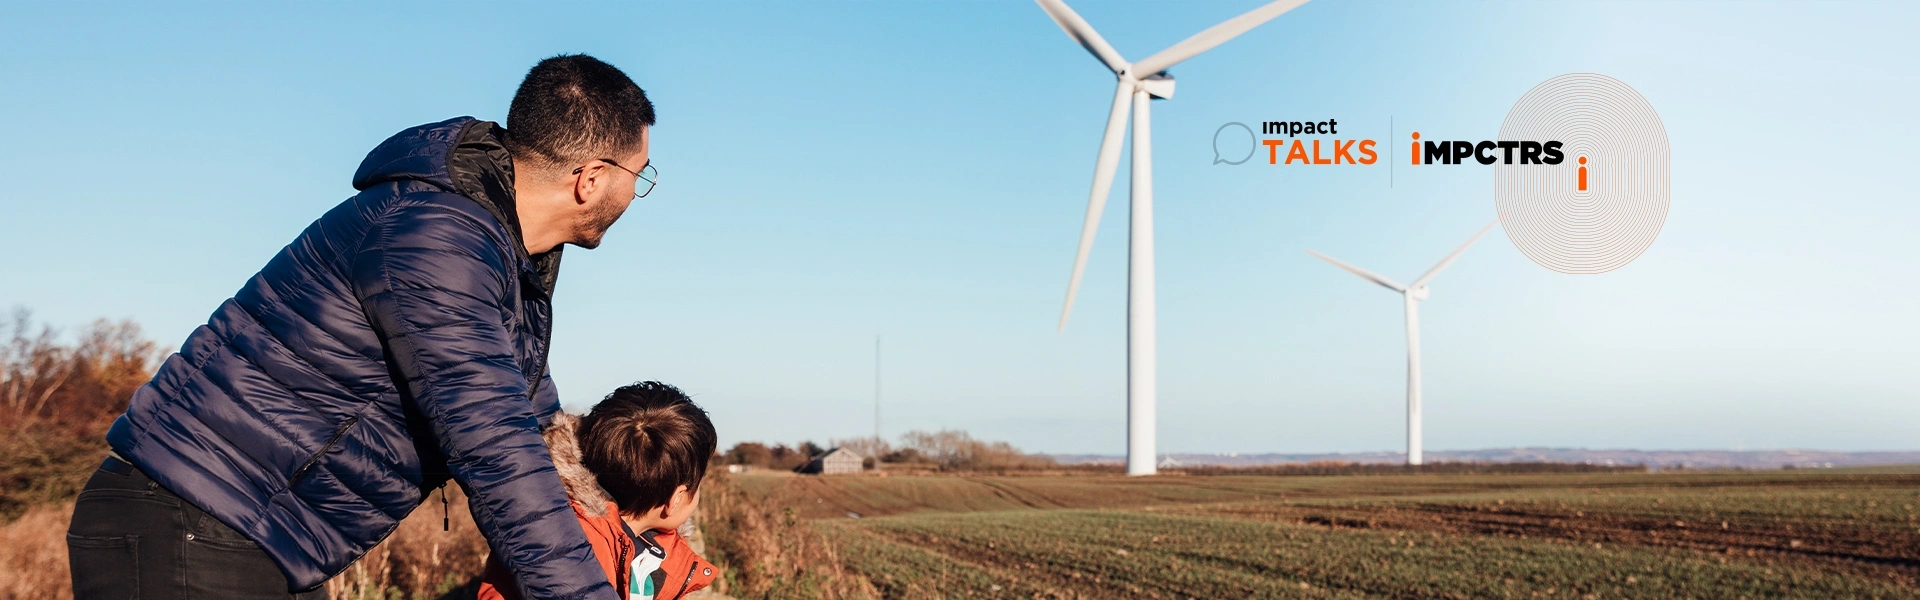 Banner image of a father and his son at the field looking at a windmill.